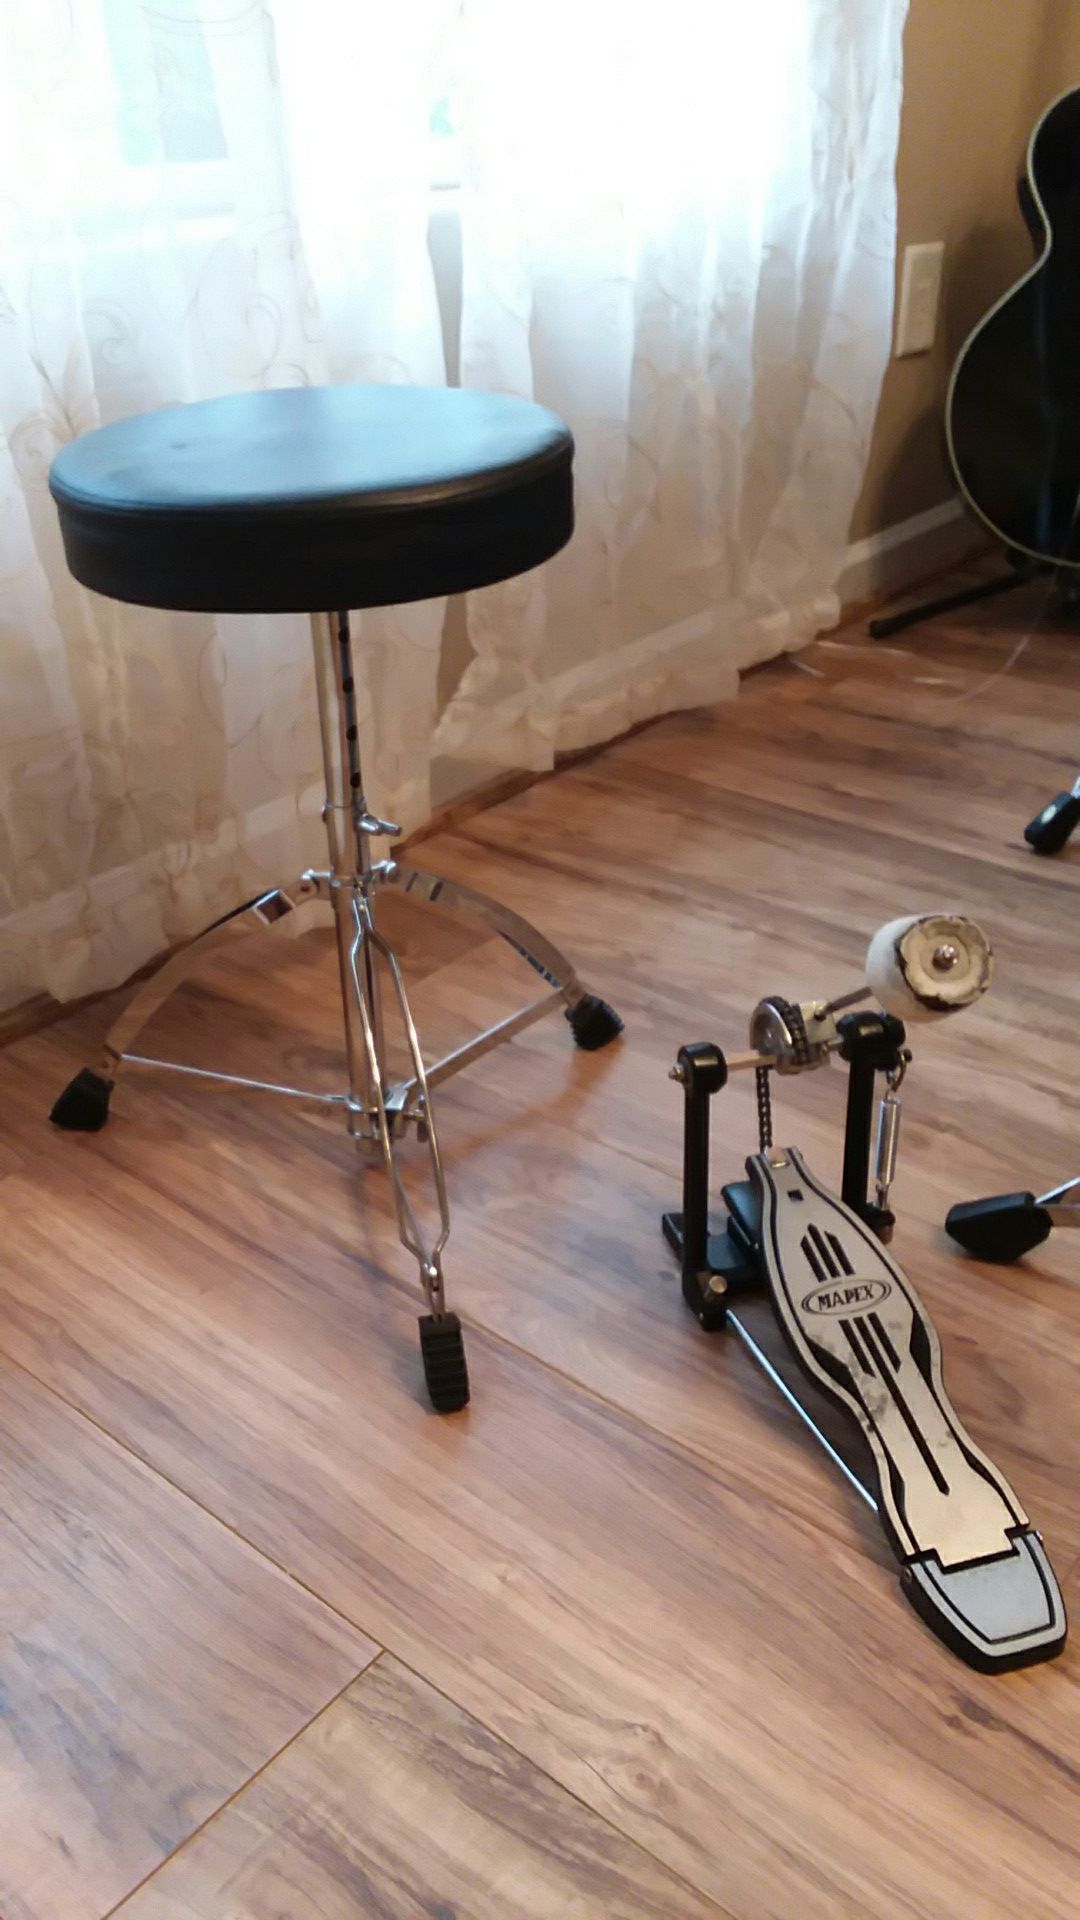 Mapex bass drum pedal, and Drum Throne